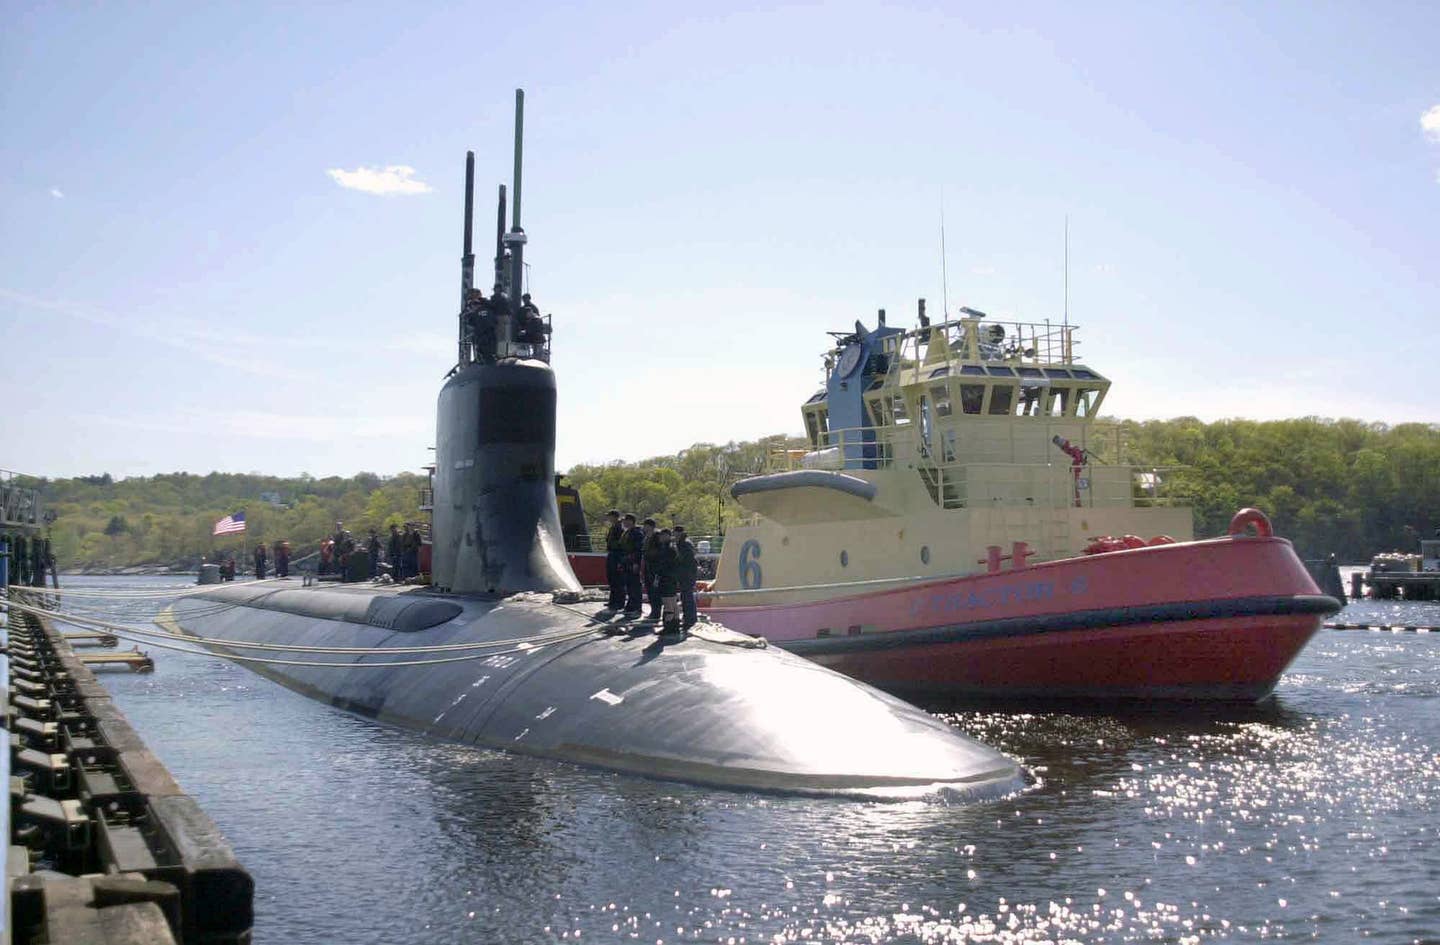 A Starboard bow view of the US Navy (USA) Seawolf Class Submarine, USS CONNECTICUT (SSN 22), showing Sailors standing on deck as the nuclear-powered attack submarine prepares to depart its homeport at Submarine Base New London, located at Groton, Connecticut (CT), for its first scheduled deployment.